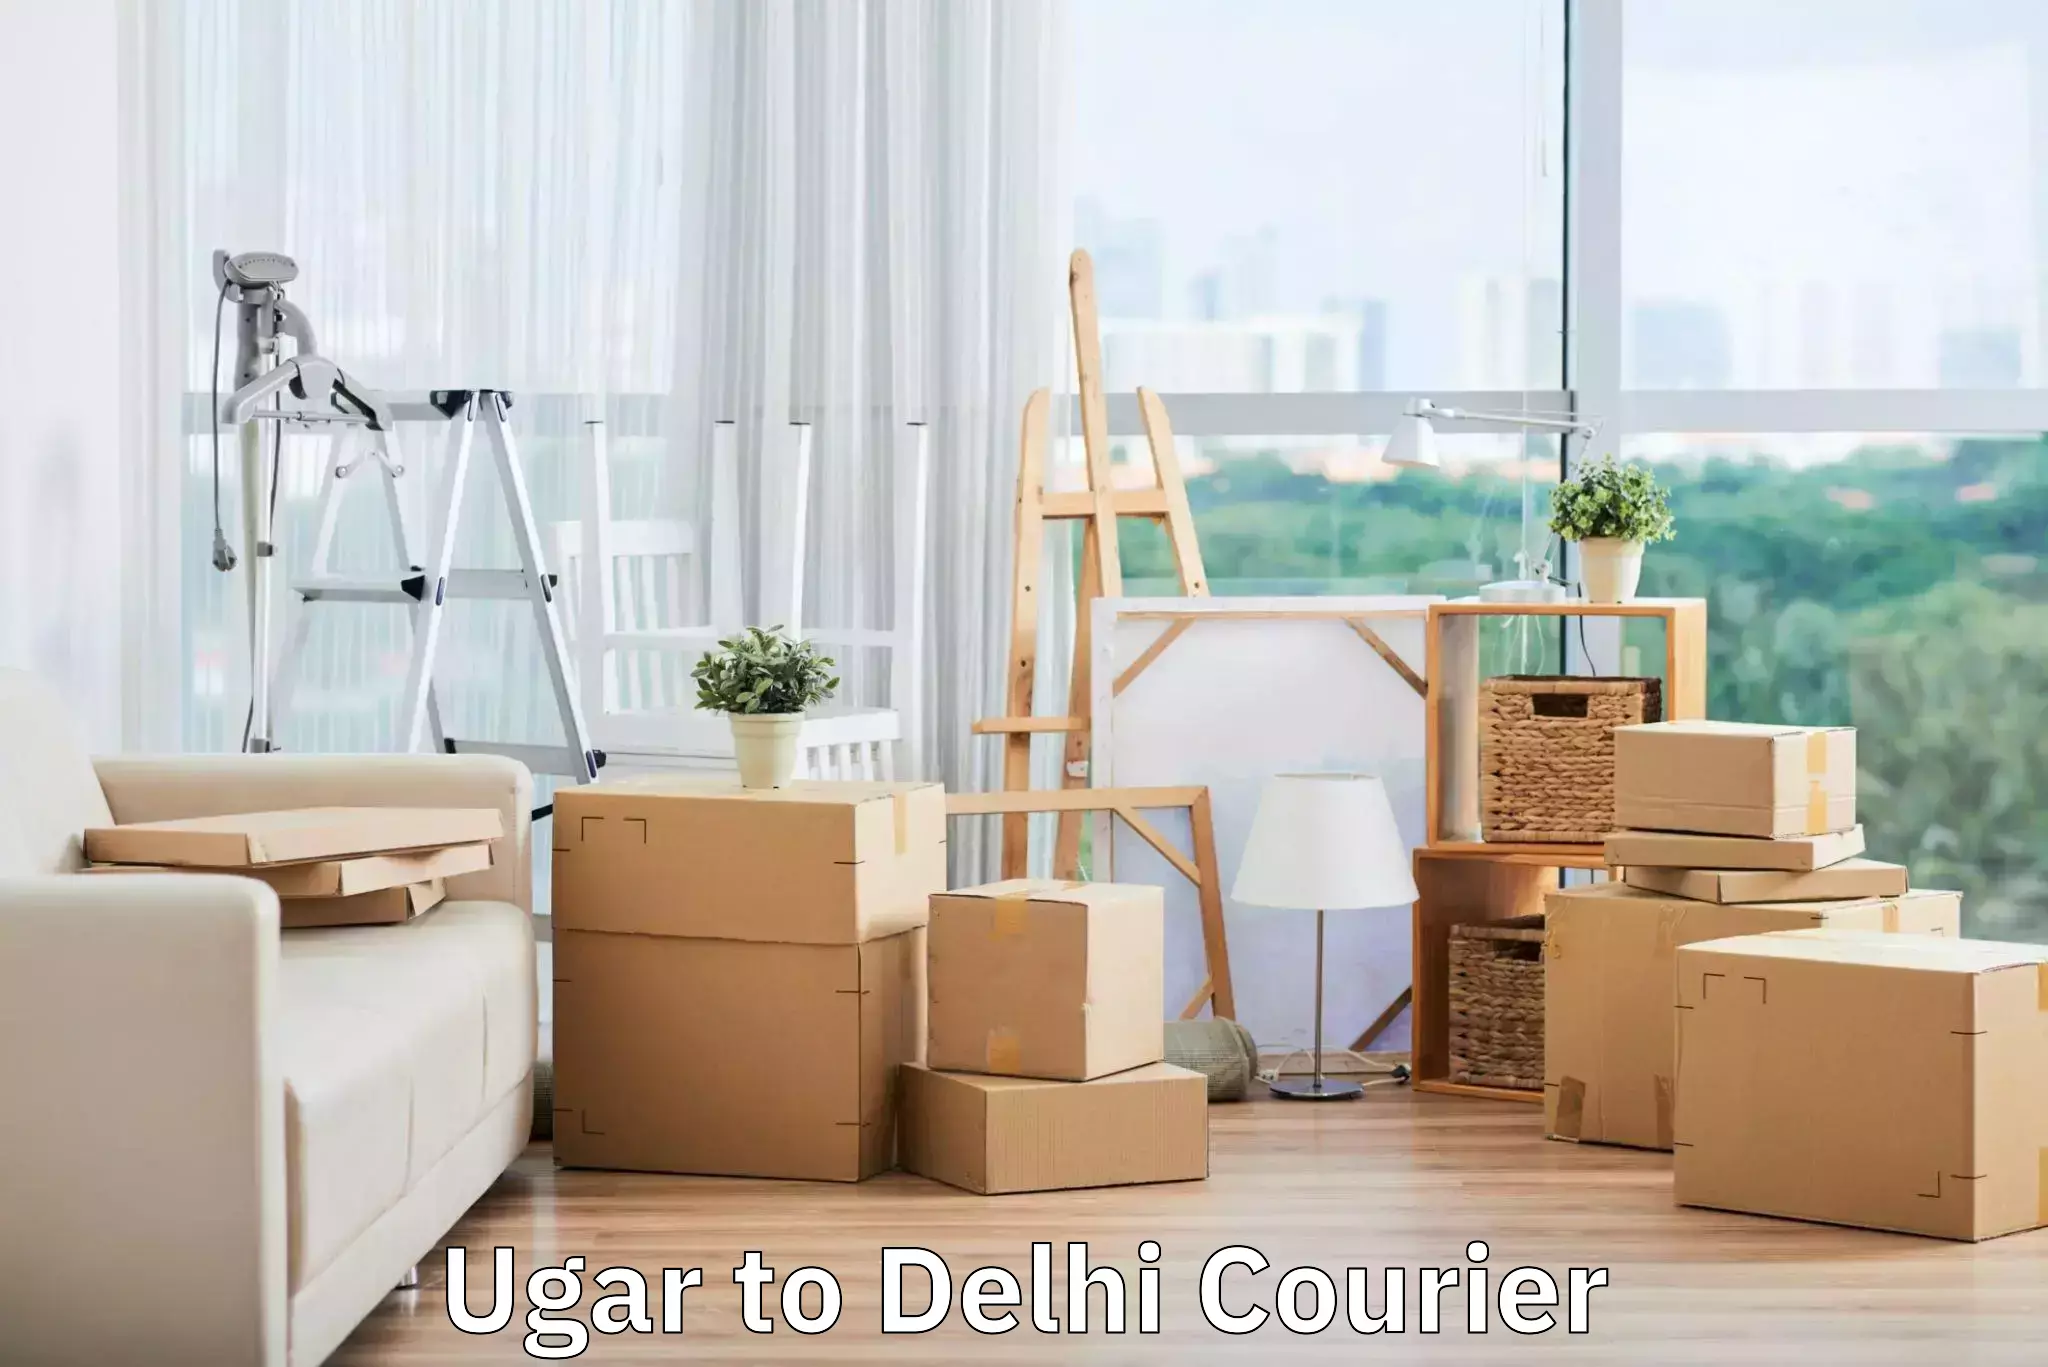 Airport luggage delivery Ugar to University of Delhi